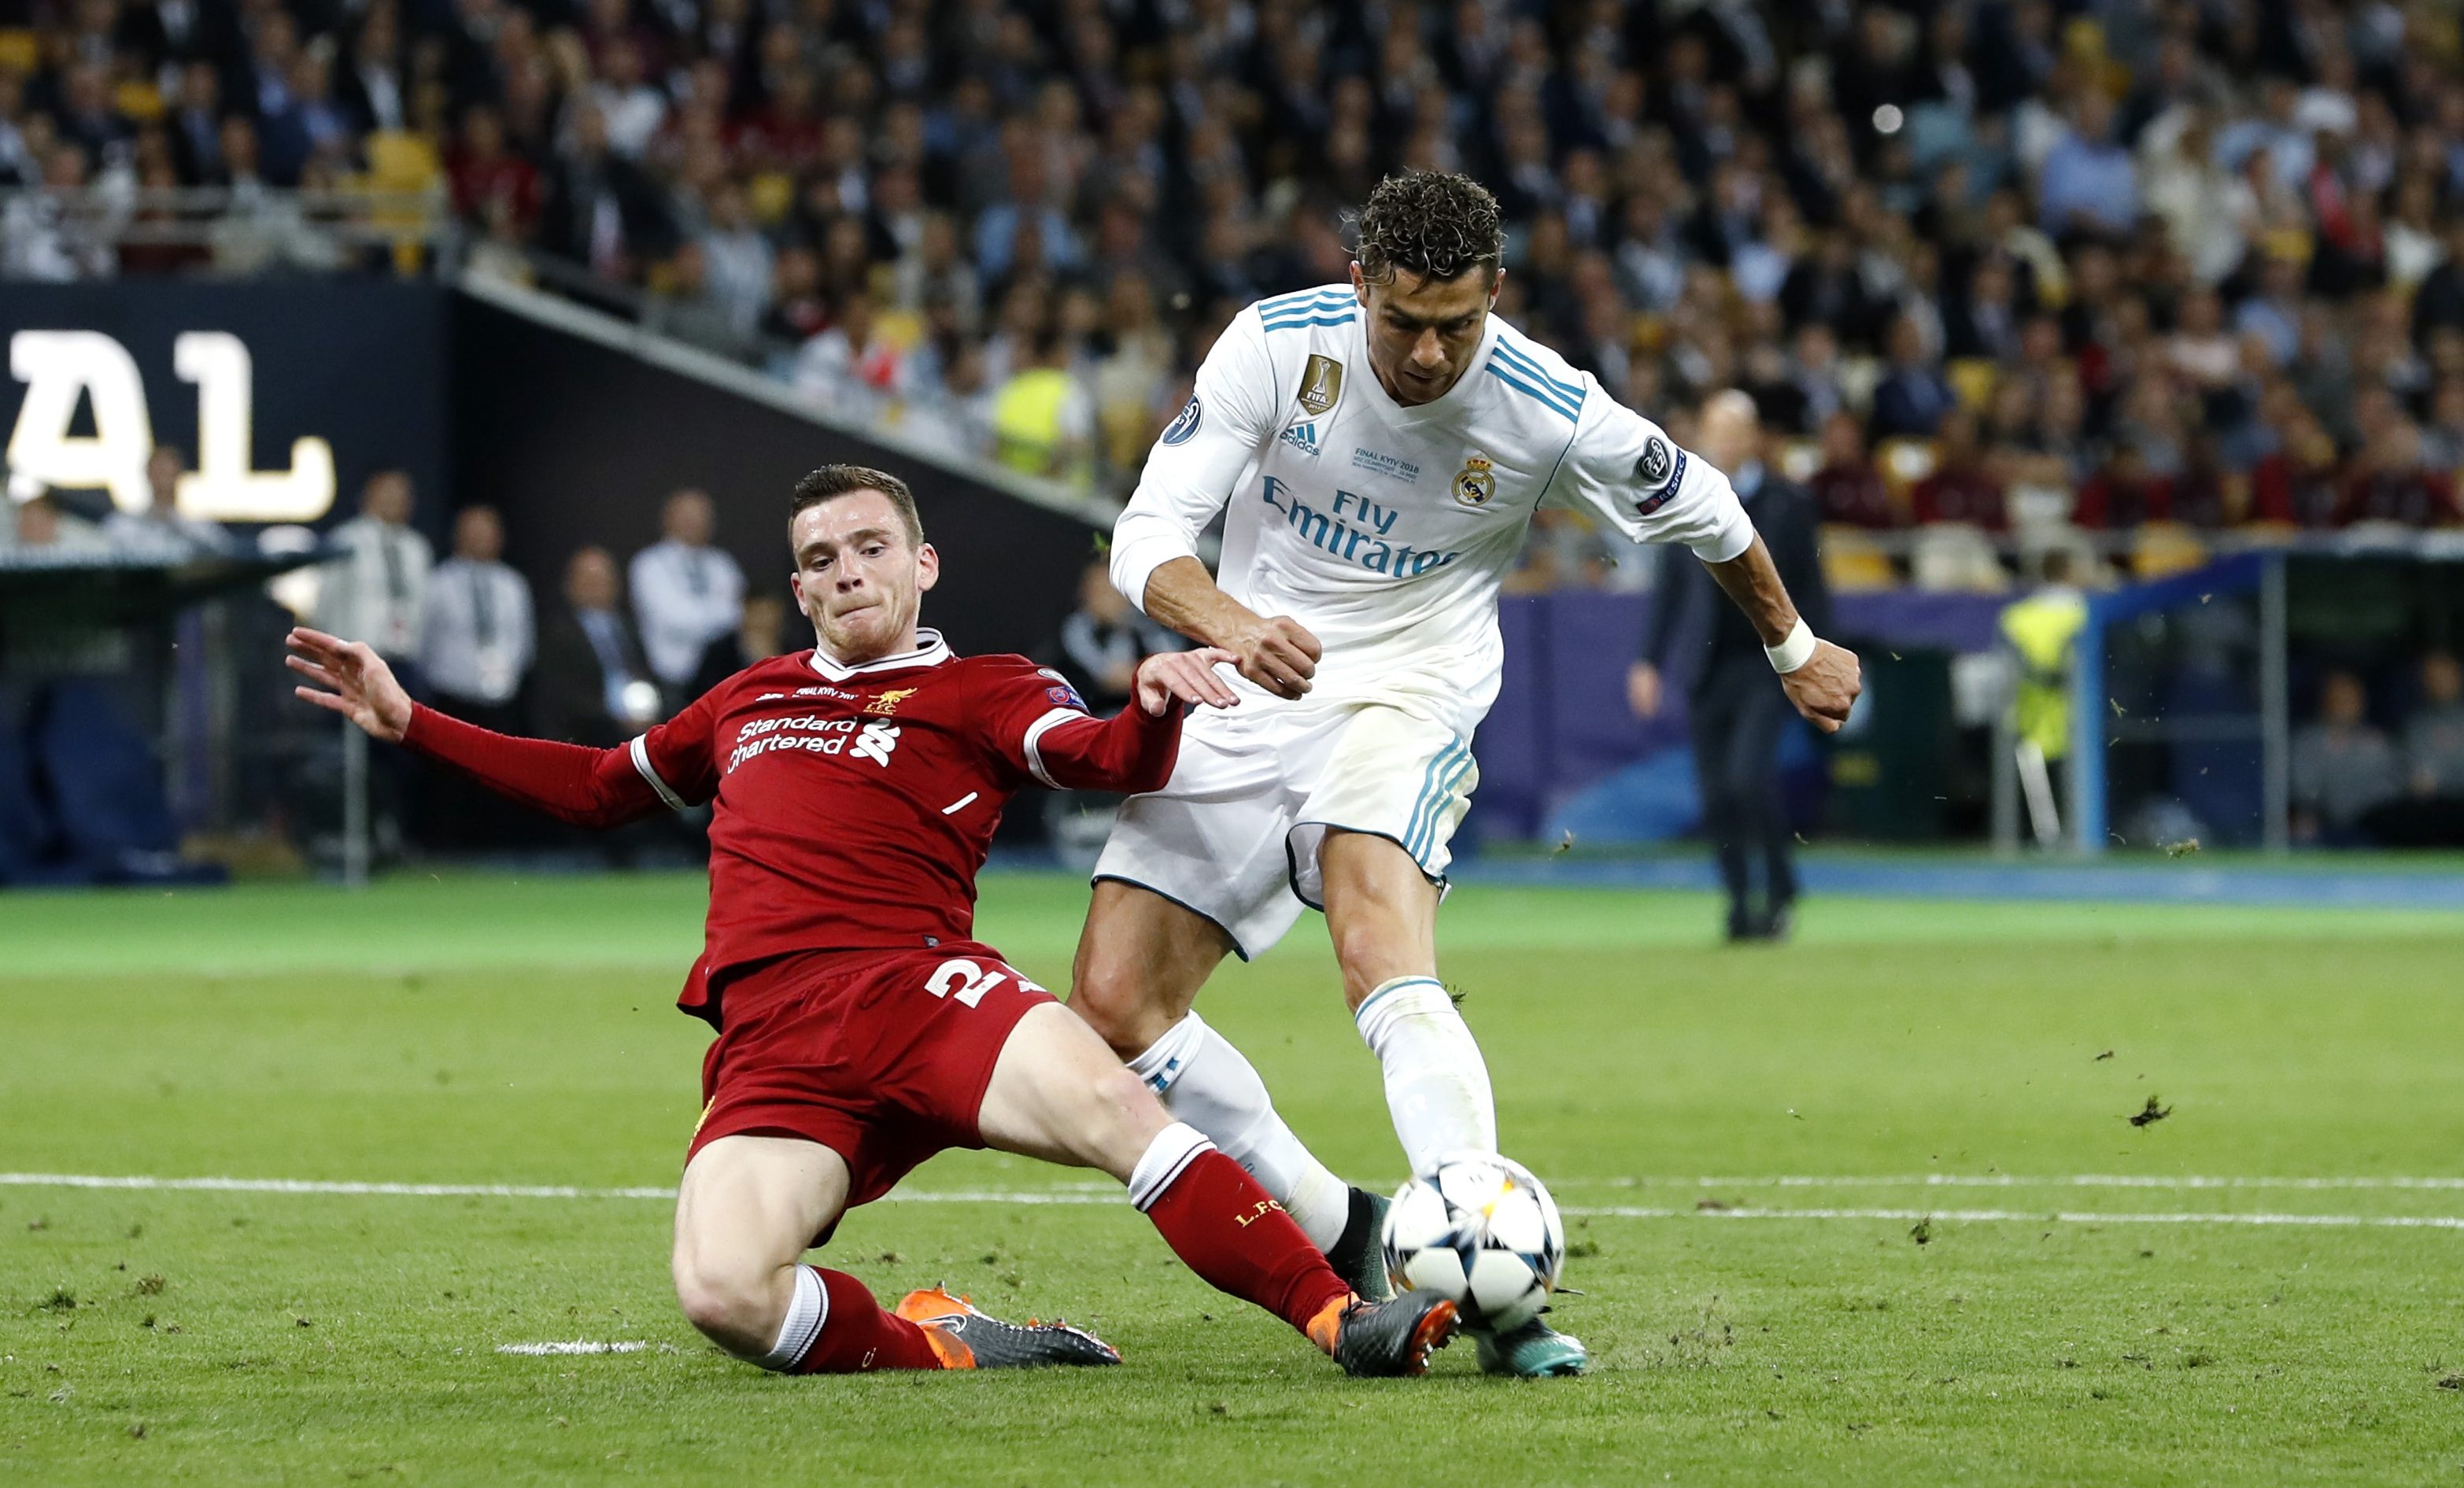 Andy Robertson make a last-ditch challenge on Ronaldo in last year's Champions League final.